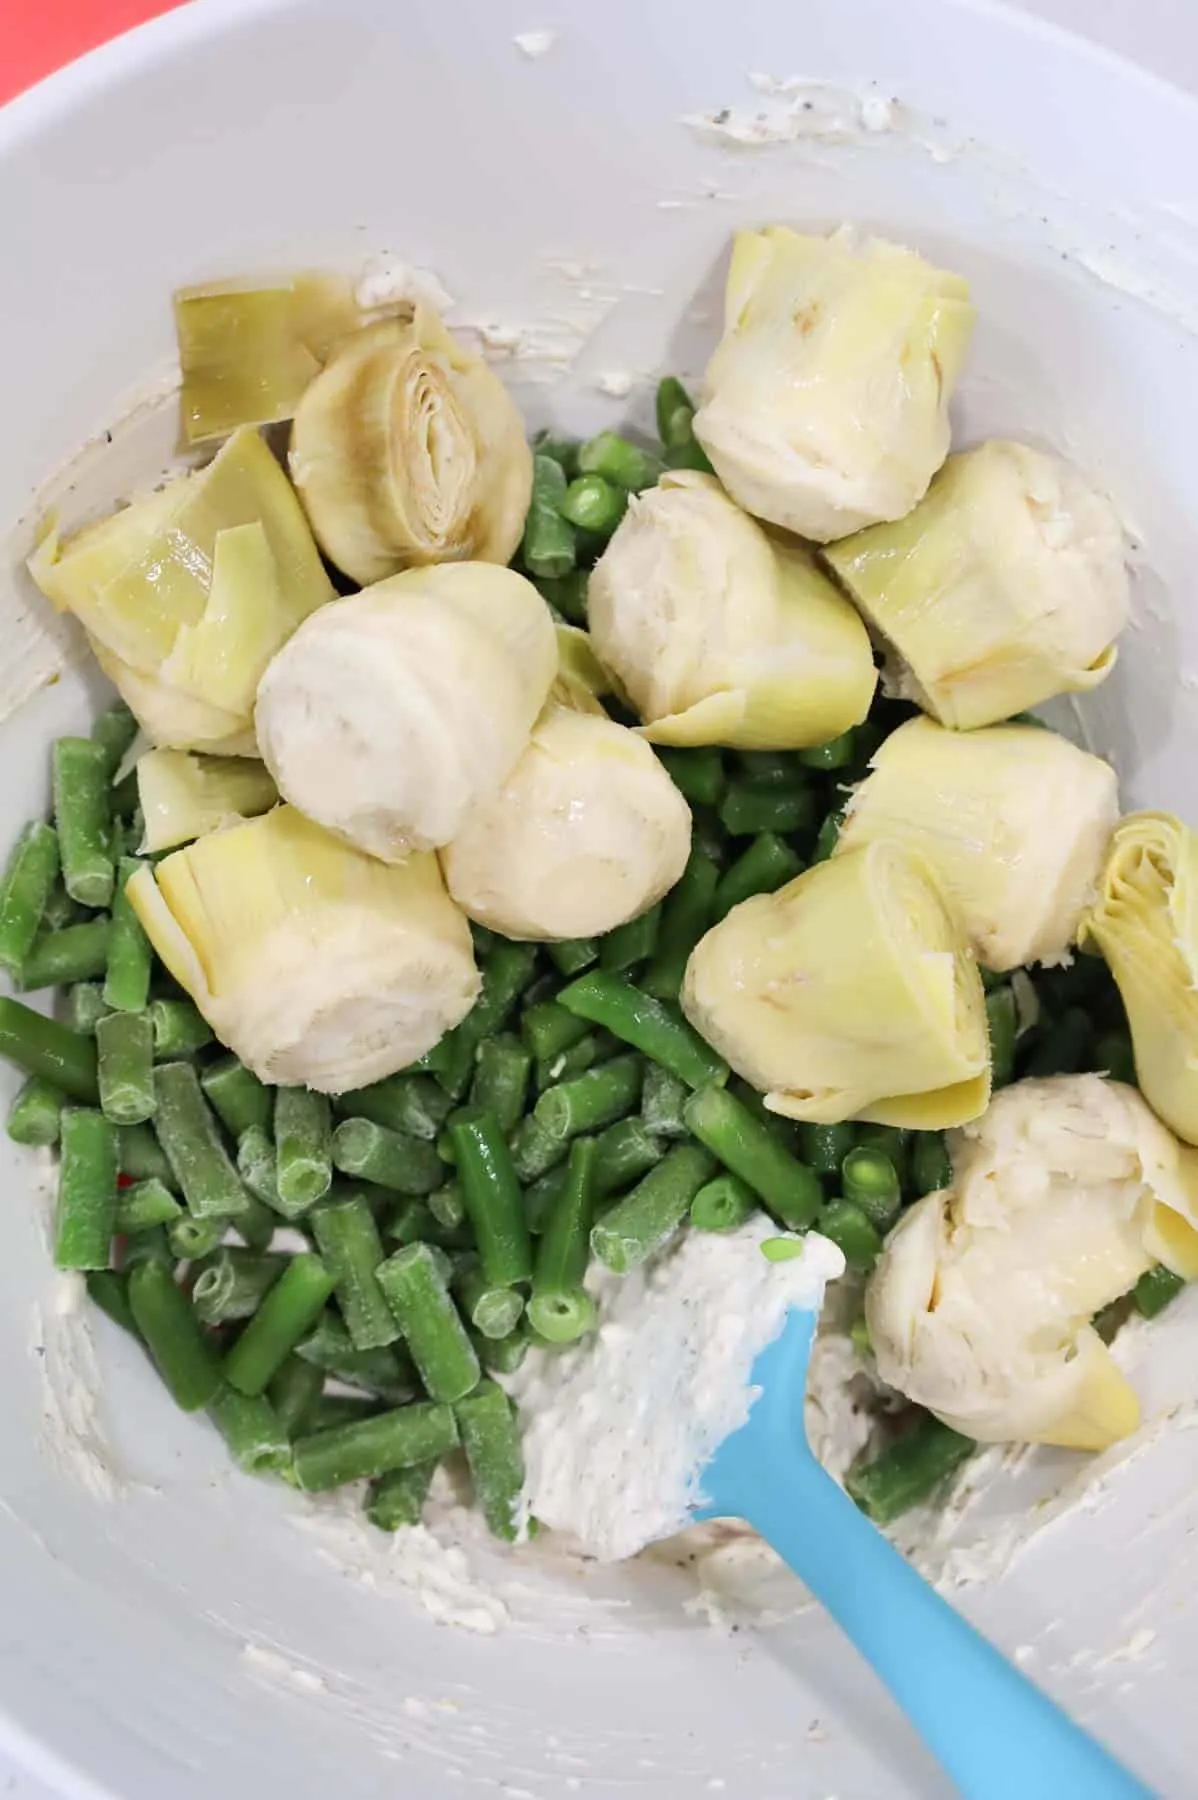 artichoke hearts and cut green beans added to bowl with sour cream and cream cheese mixture